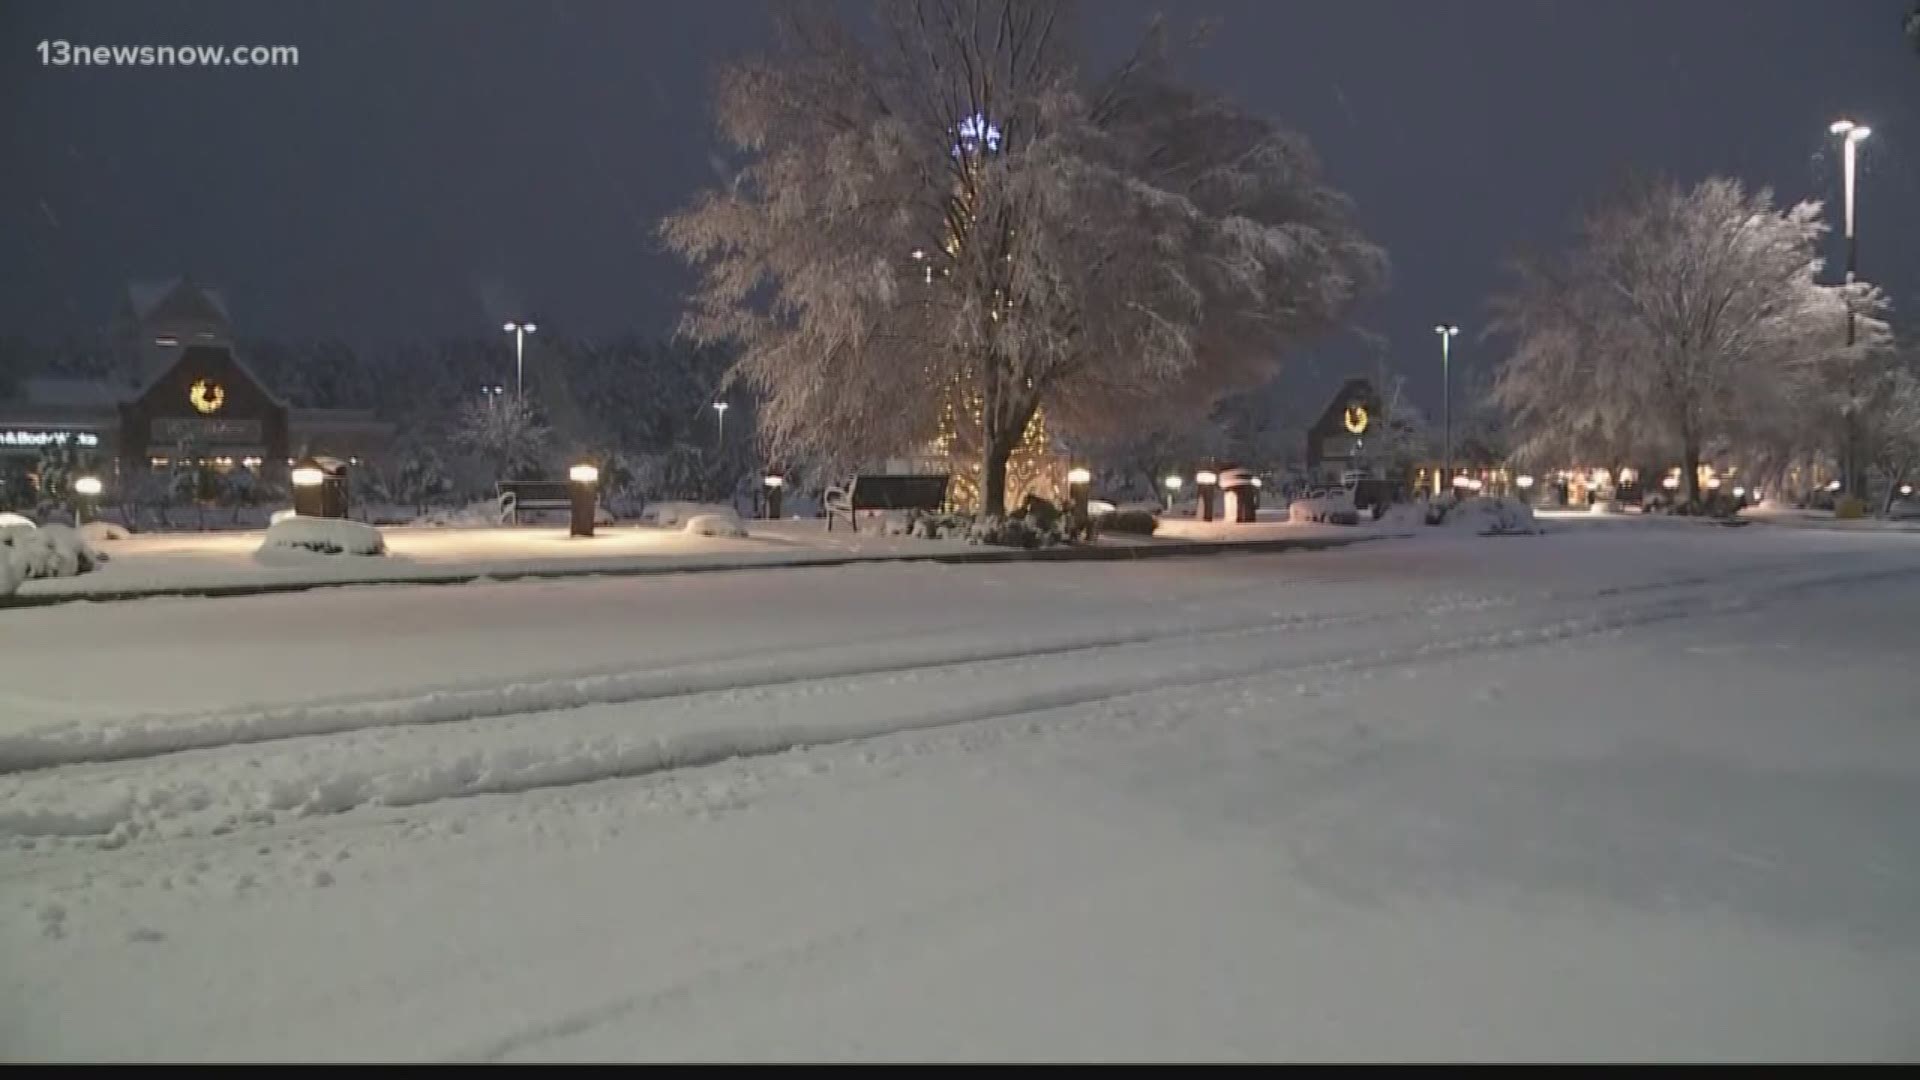 VDOT crews are working around the clock to make sure roads are safe after the winter storm.